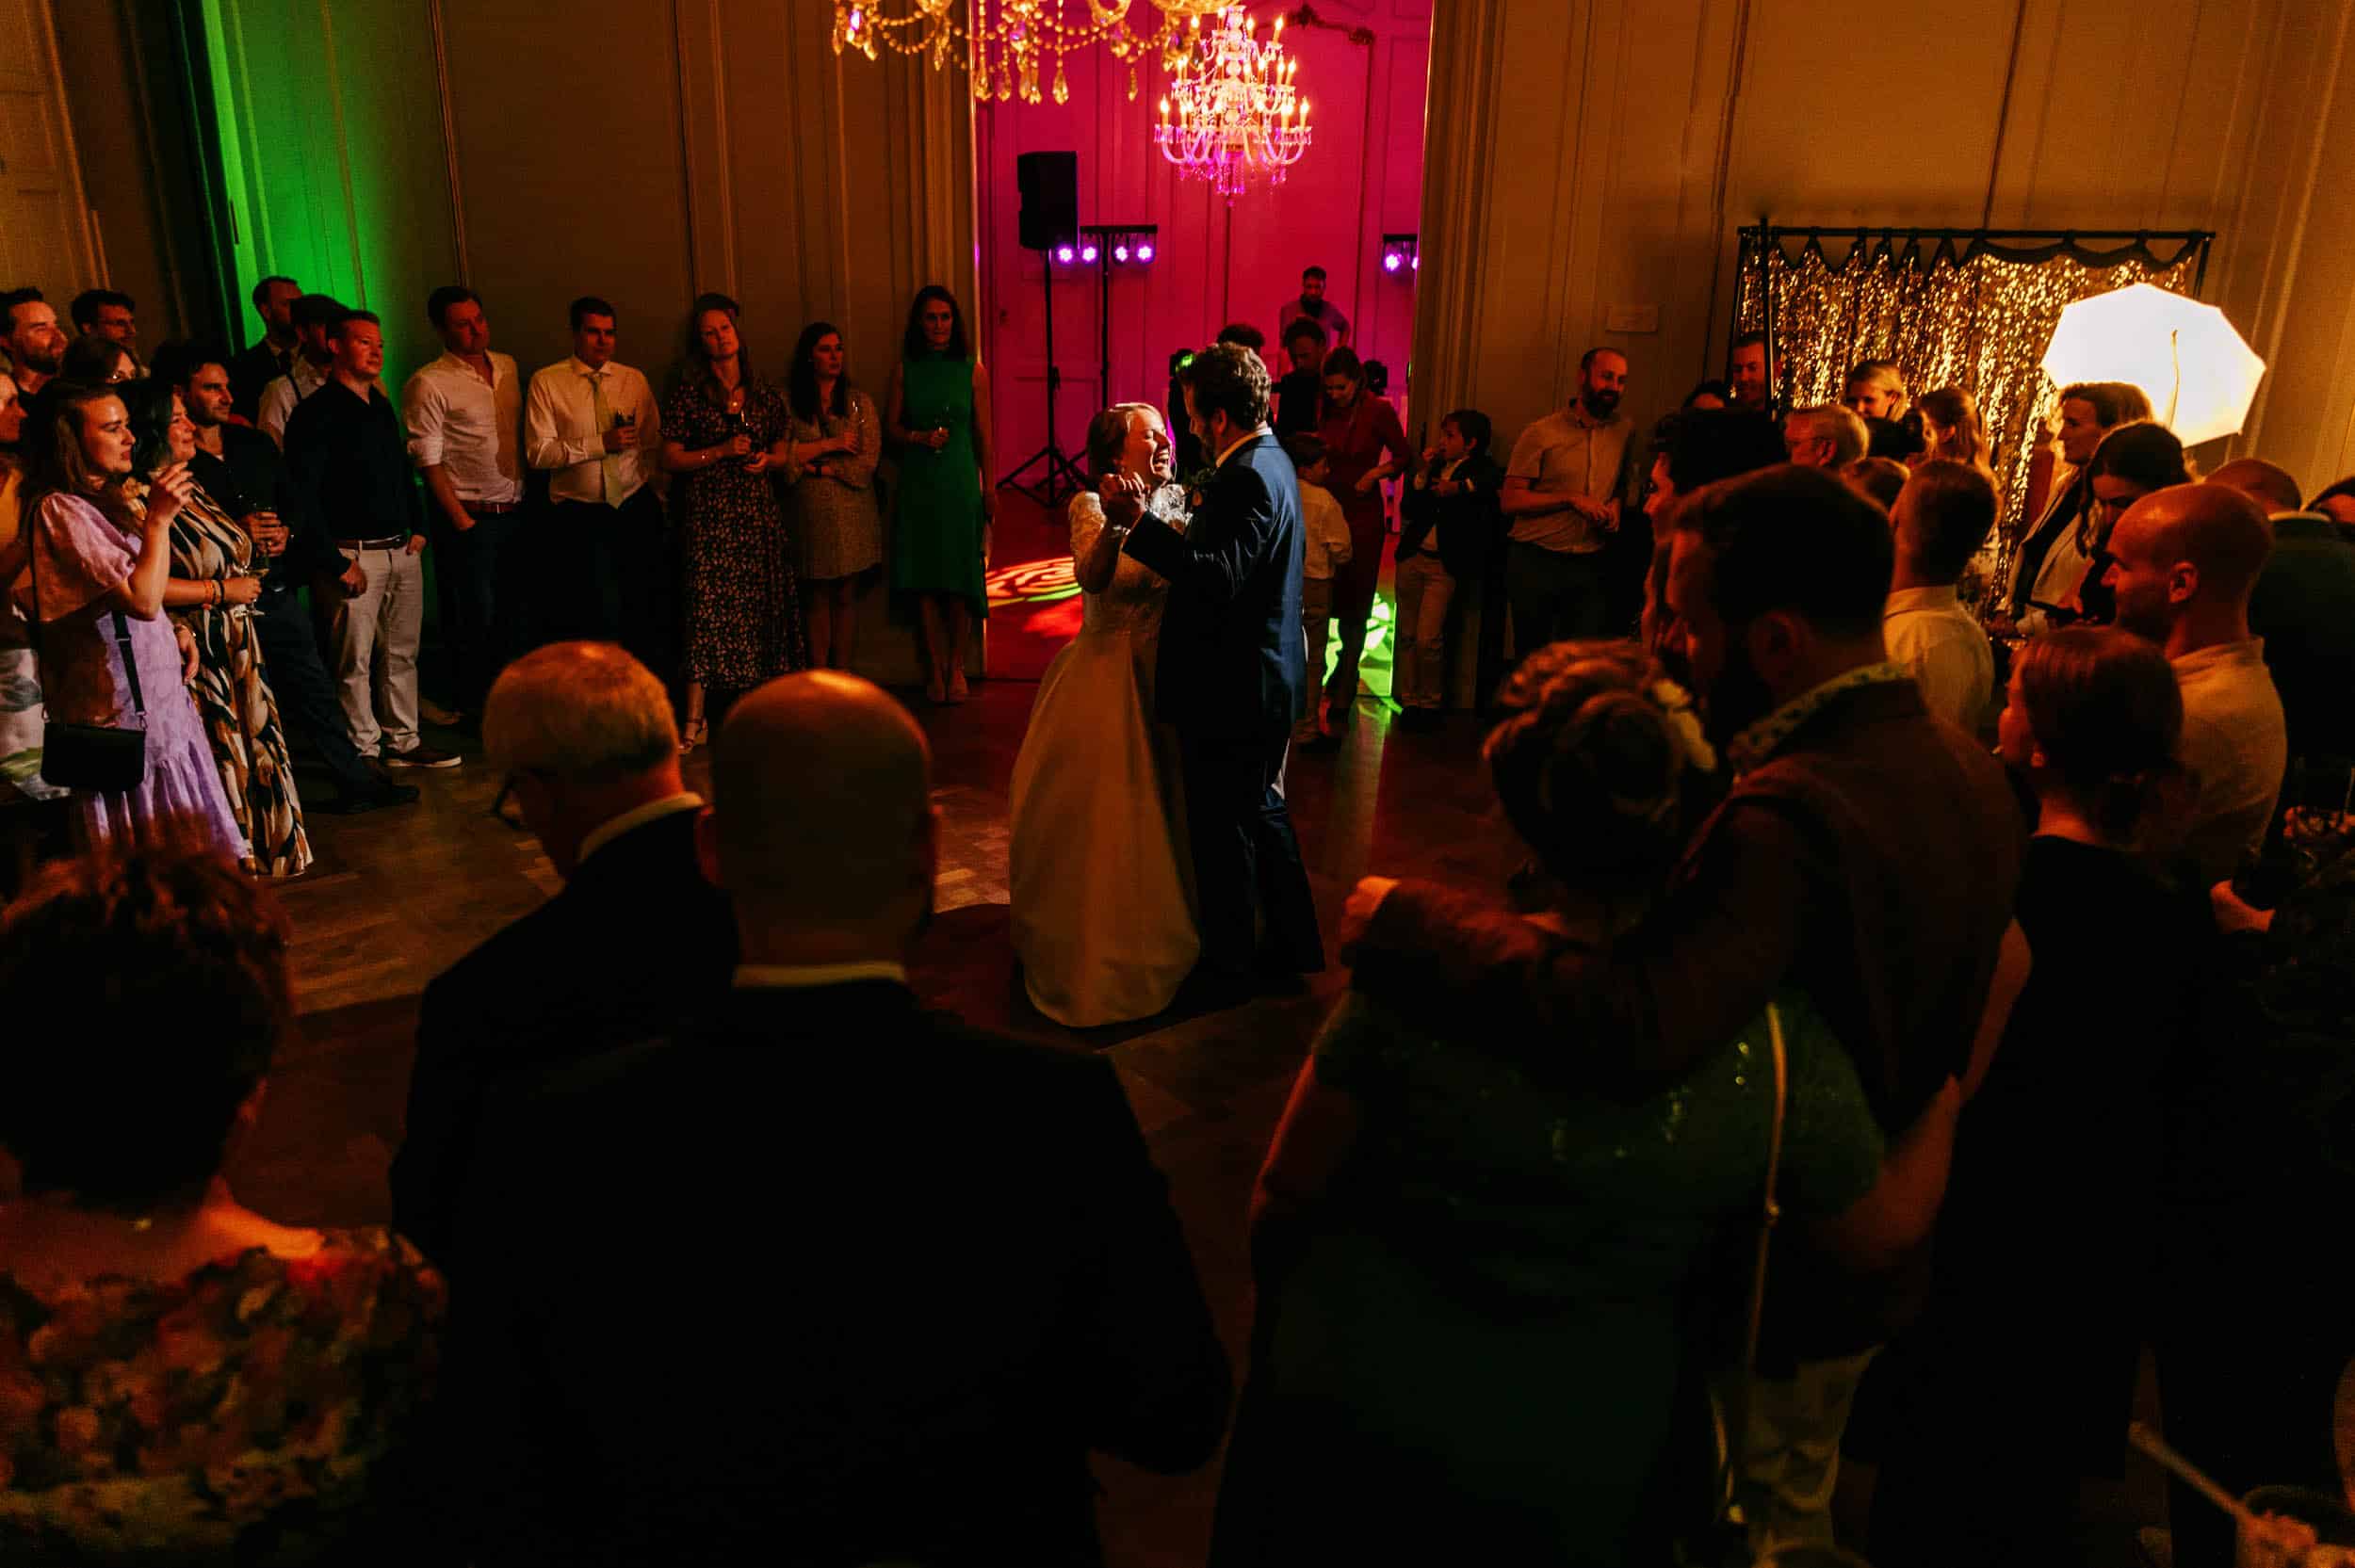 The perfect wedding moment captured by the professional wedding photographer: a bride and groom dancing at their reception.